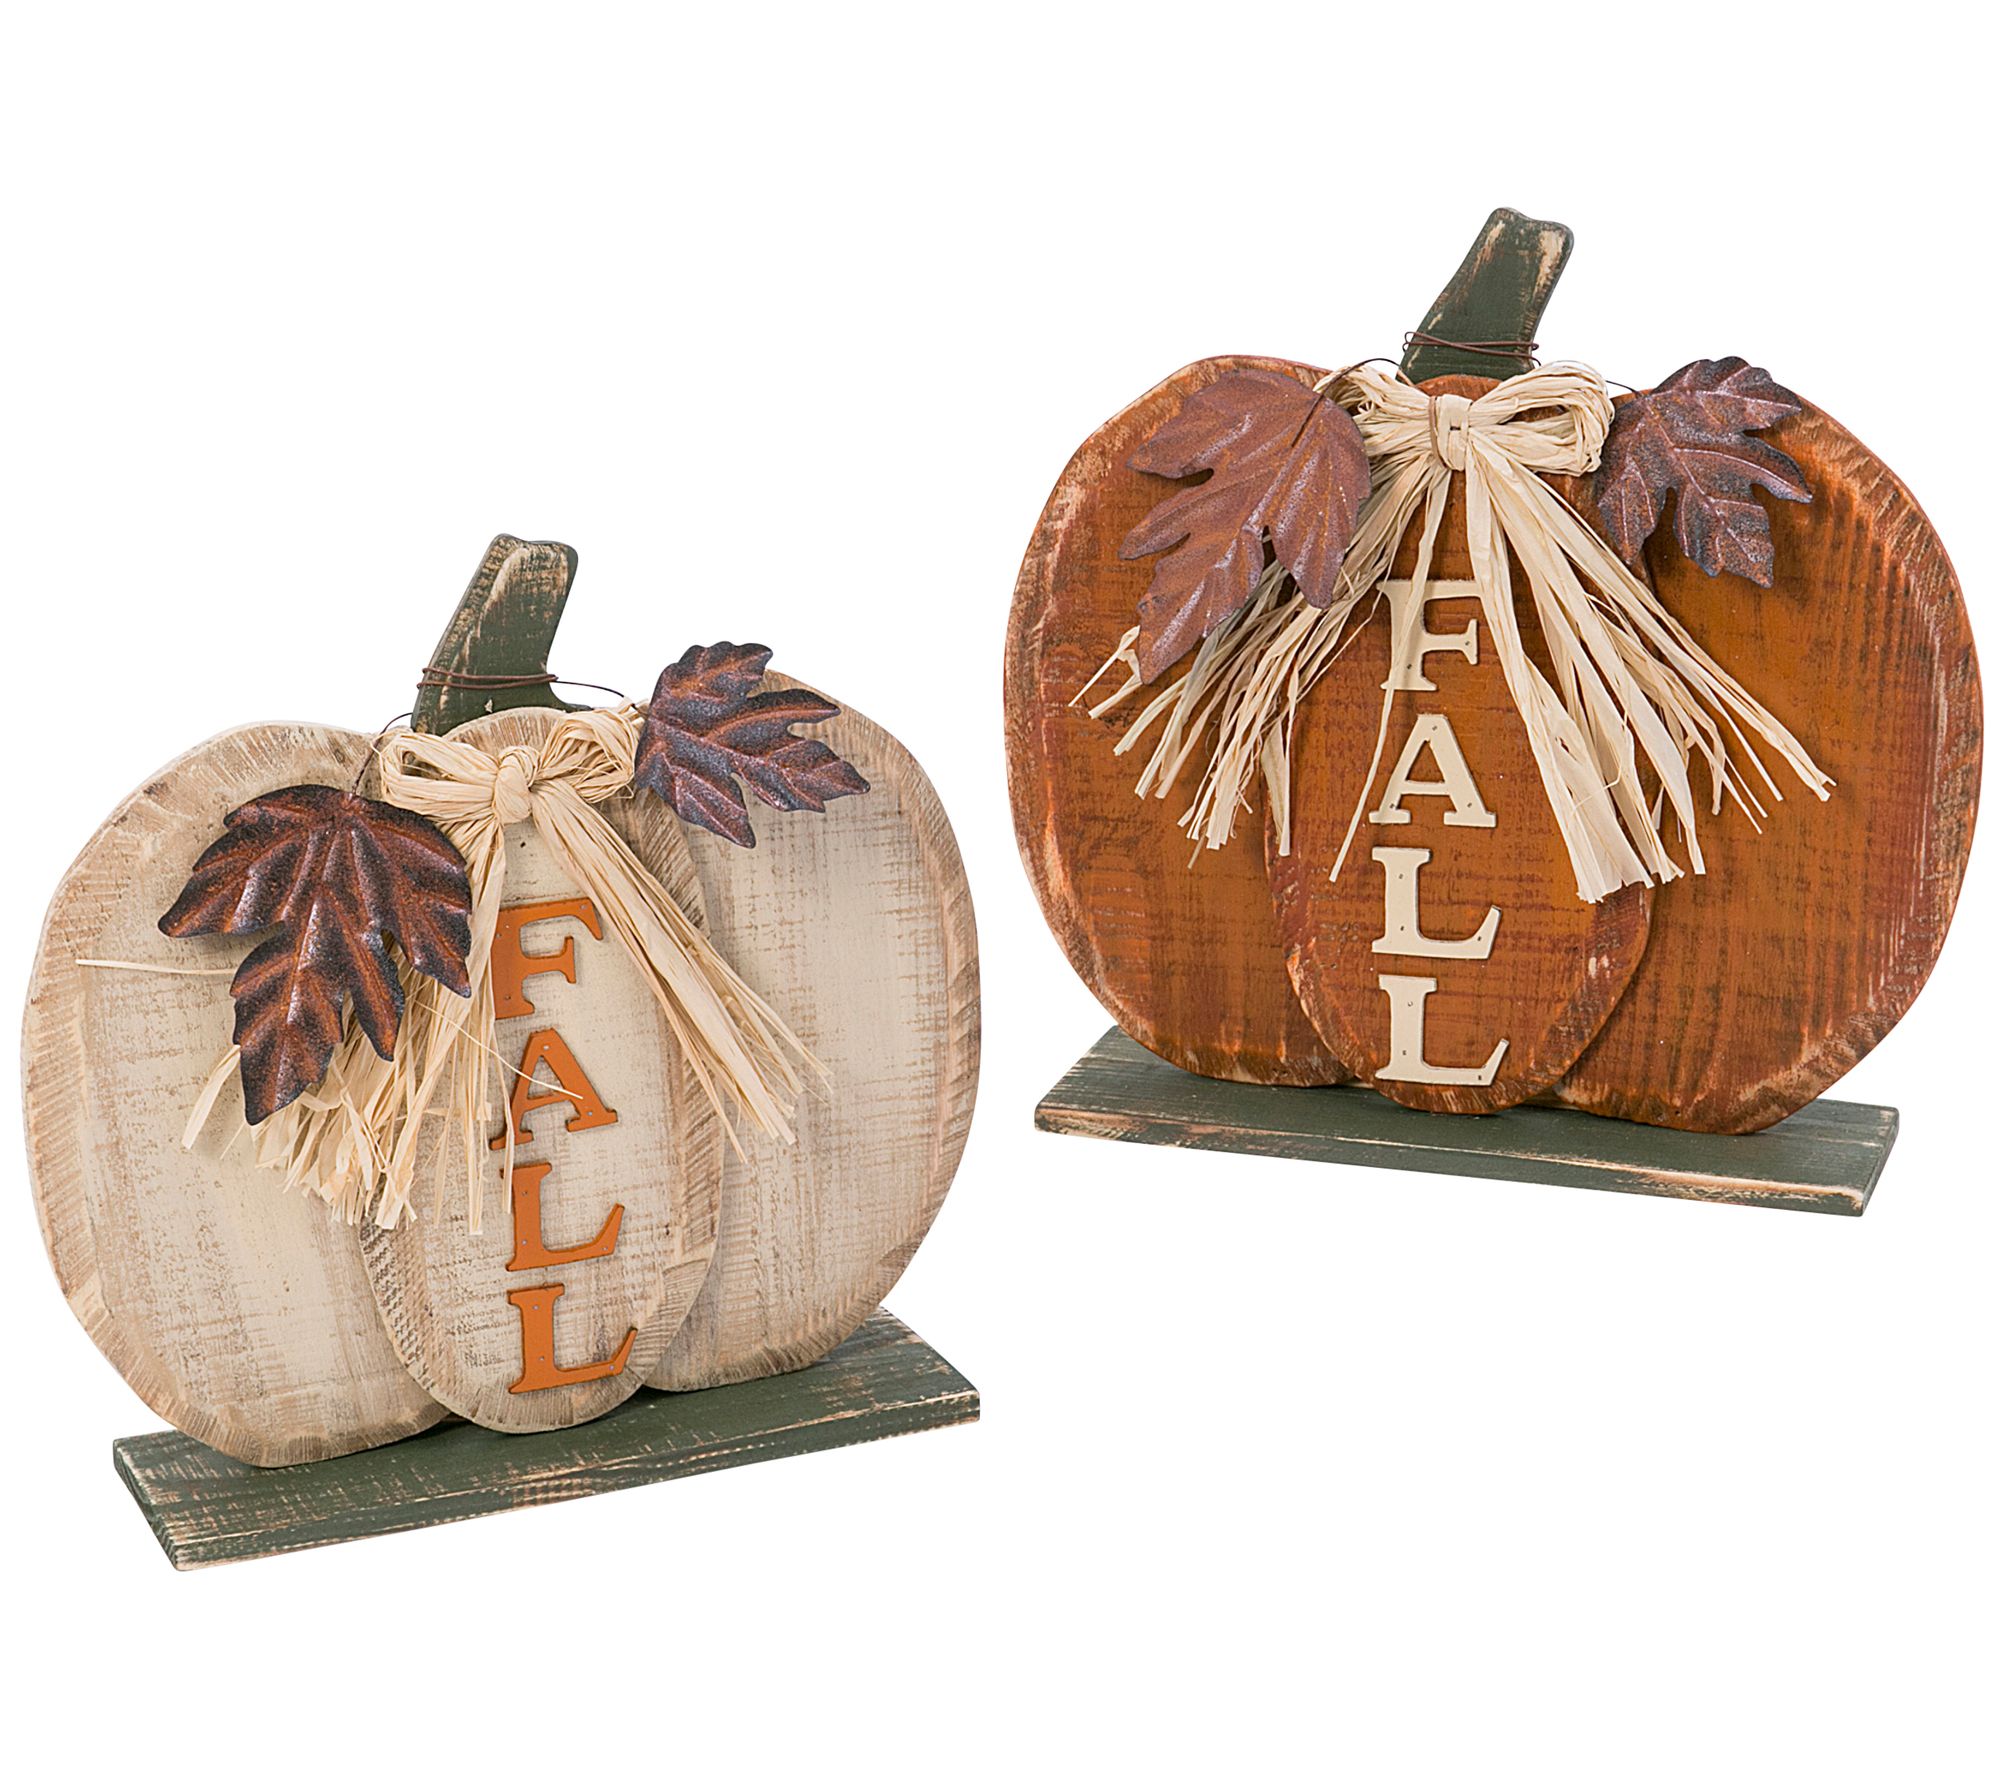 S/2 Assorted Wooden Tabletop Fall Pumpkin Decorby Gerson Co. - QVC.com